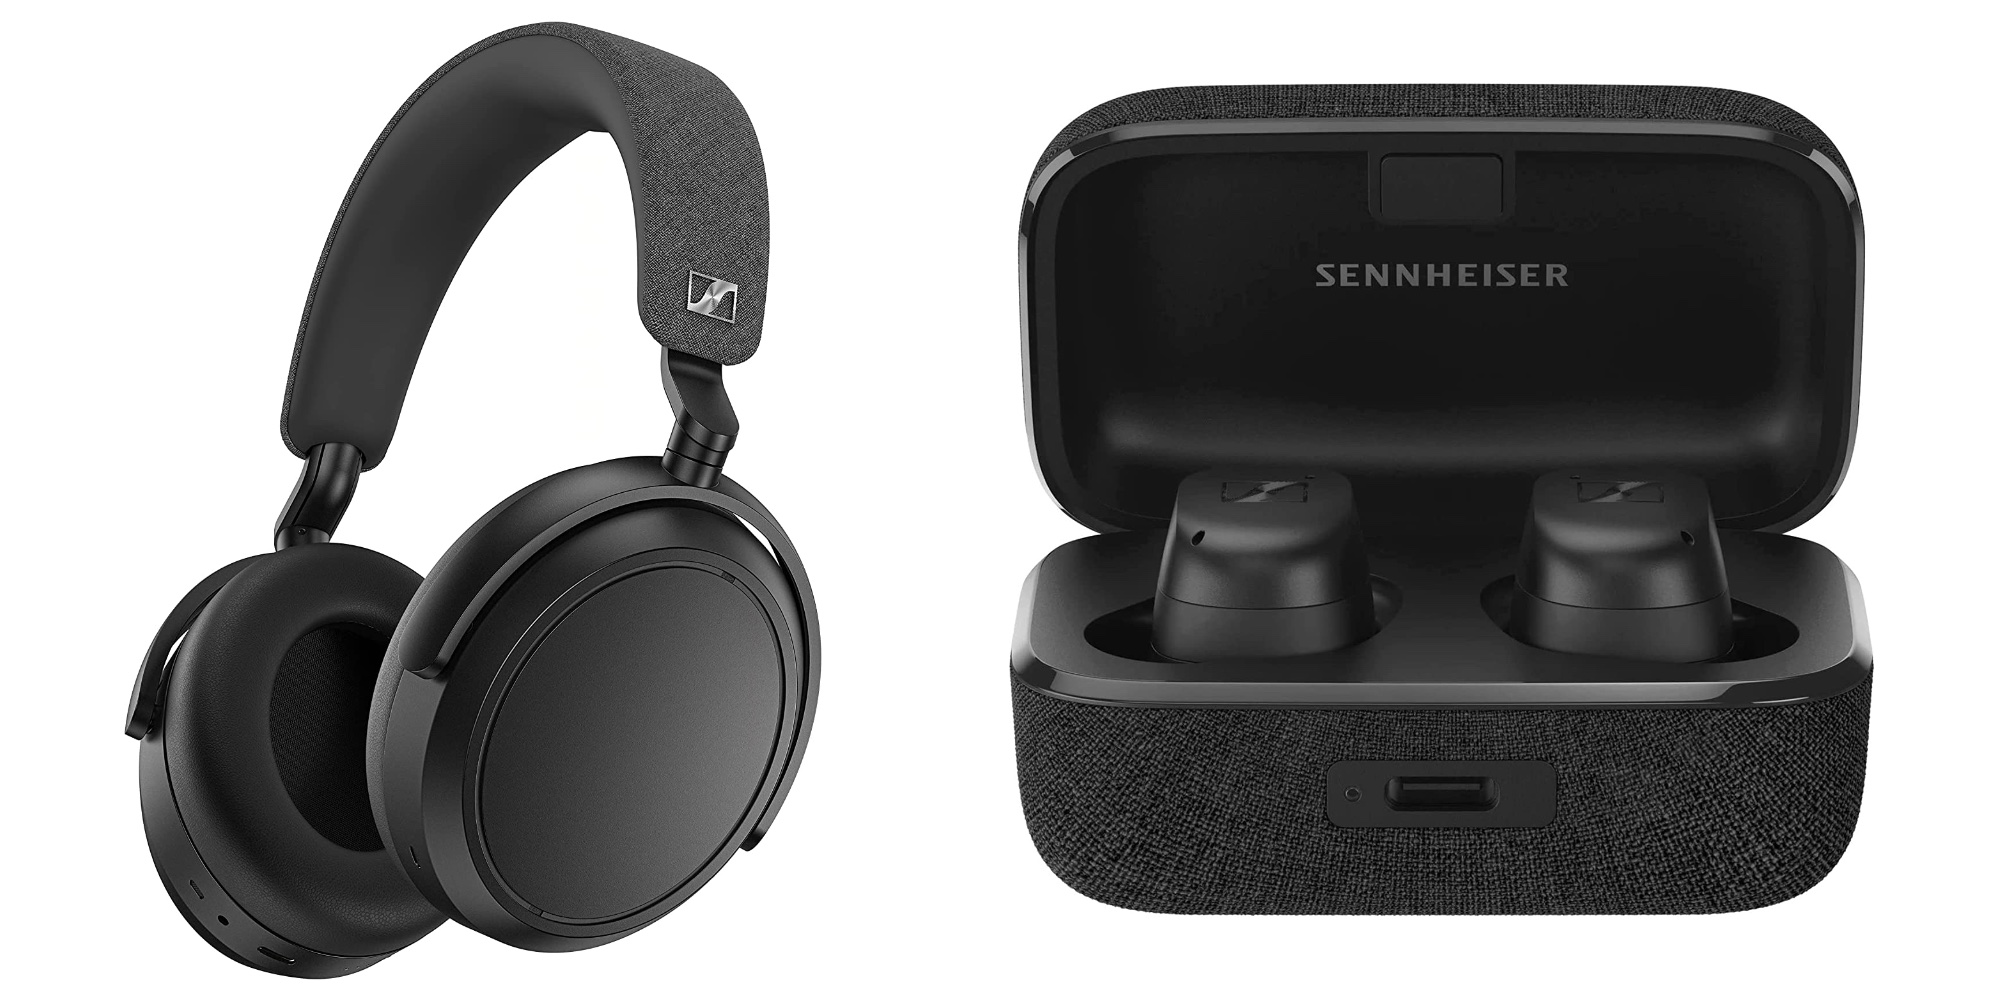 Leak of Sennheiser's yet-to-be-unveiled Momentum 4 headphone shows new  design and hefty price tag 